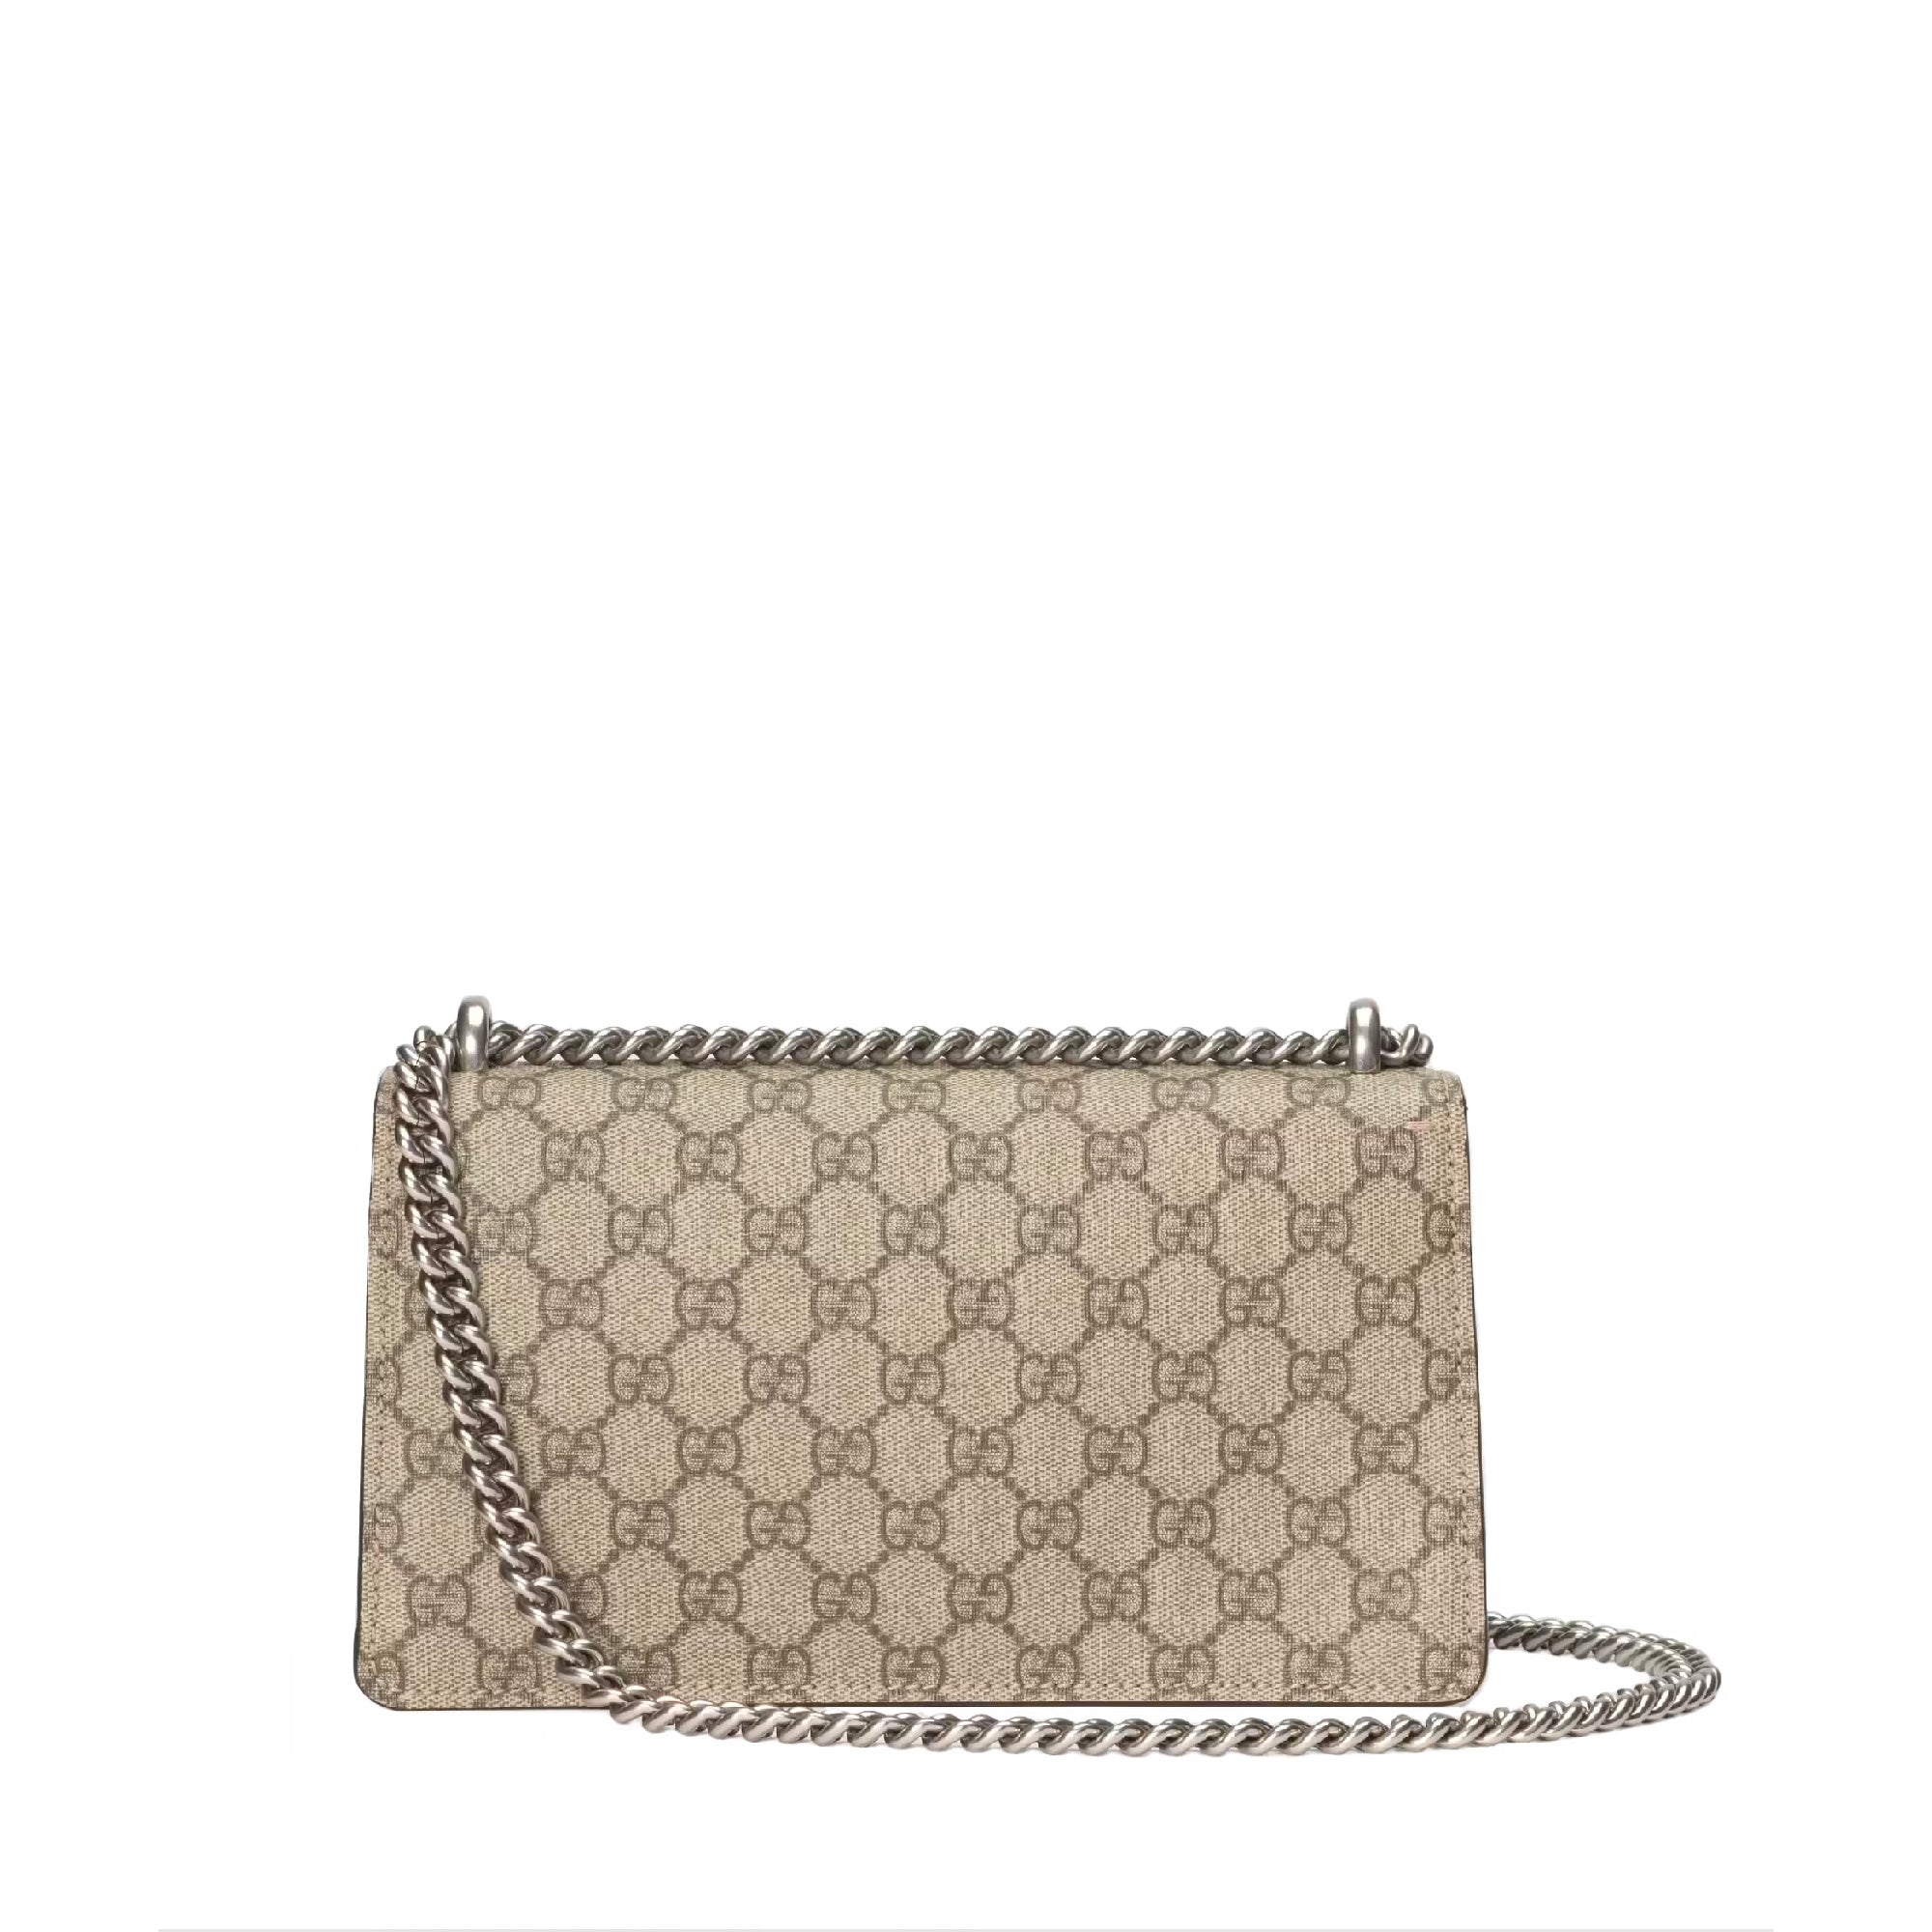 Gucci - Dionysus GG Small Shoulder Bag - (Brown) view 3